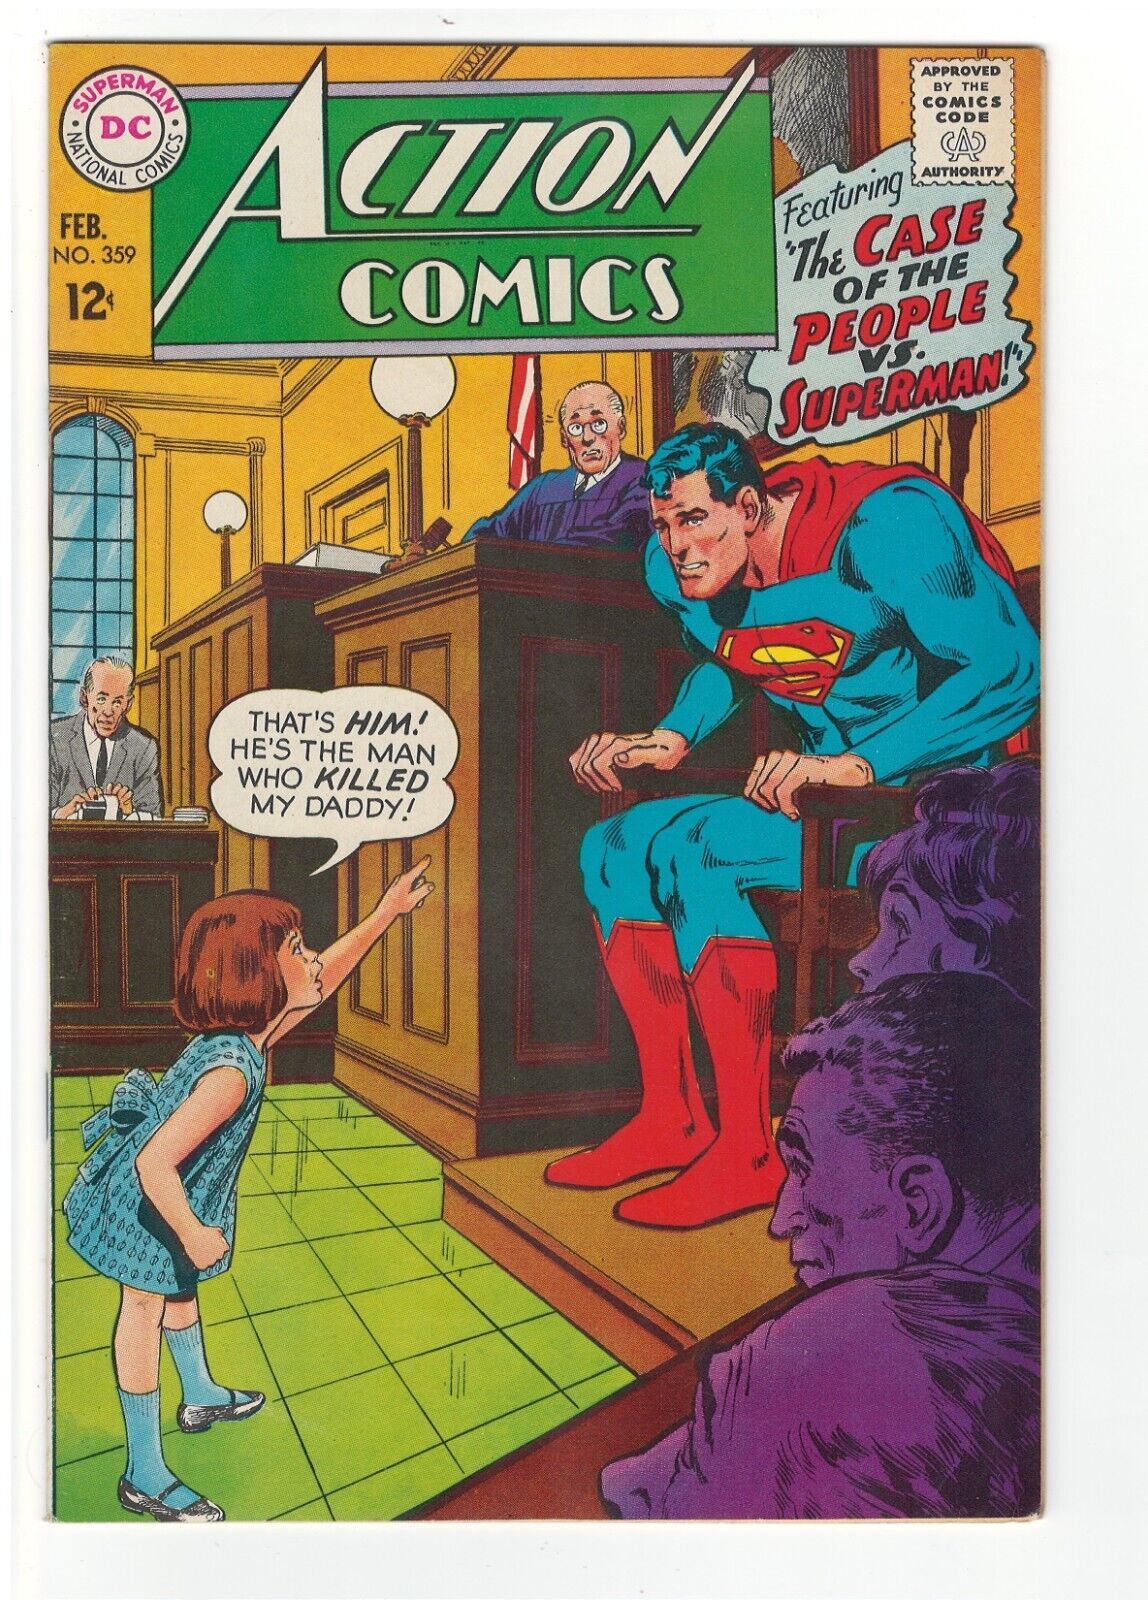 ACTION COMICS 359 ( 1968 ) THE CASE OF THE PEOPLE VS. SUPERMAN. NM